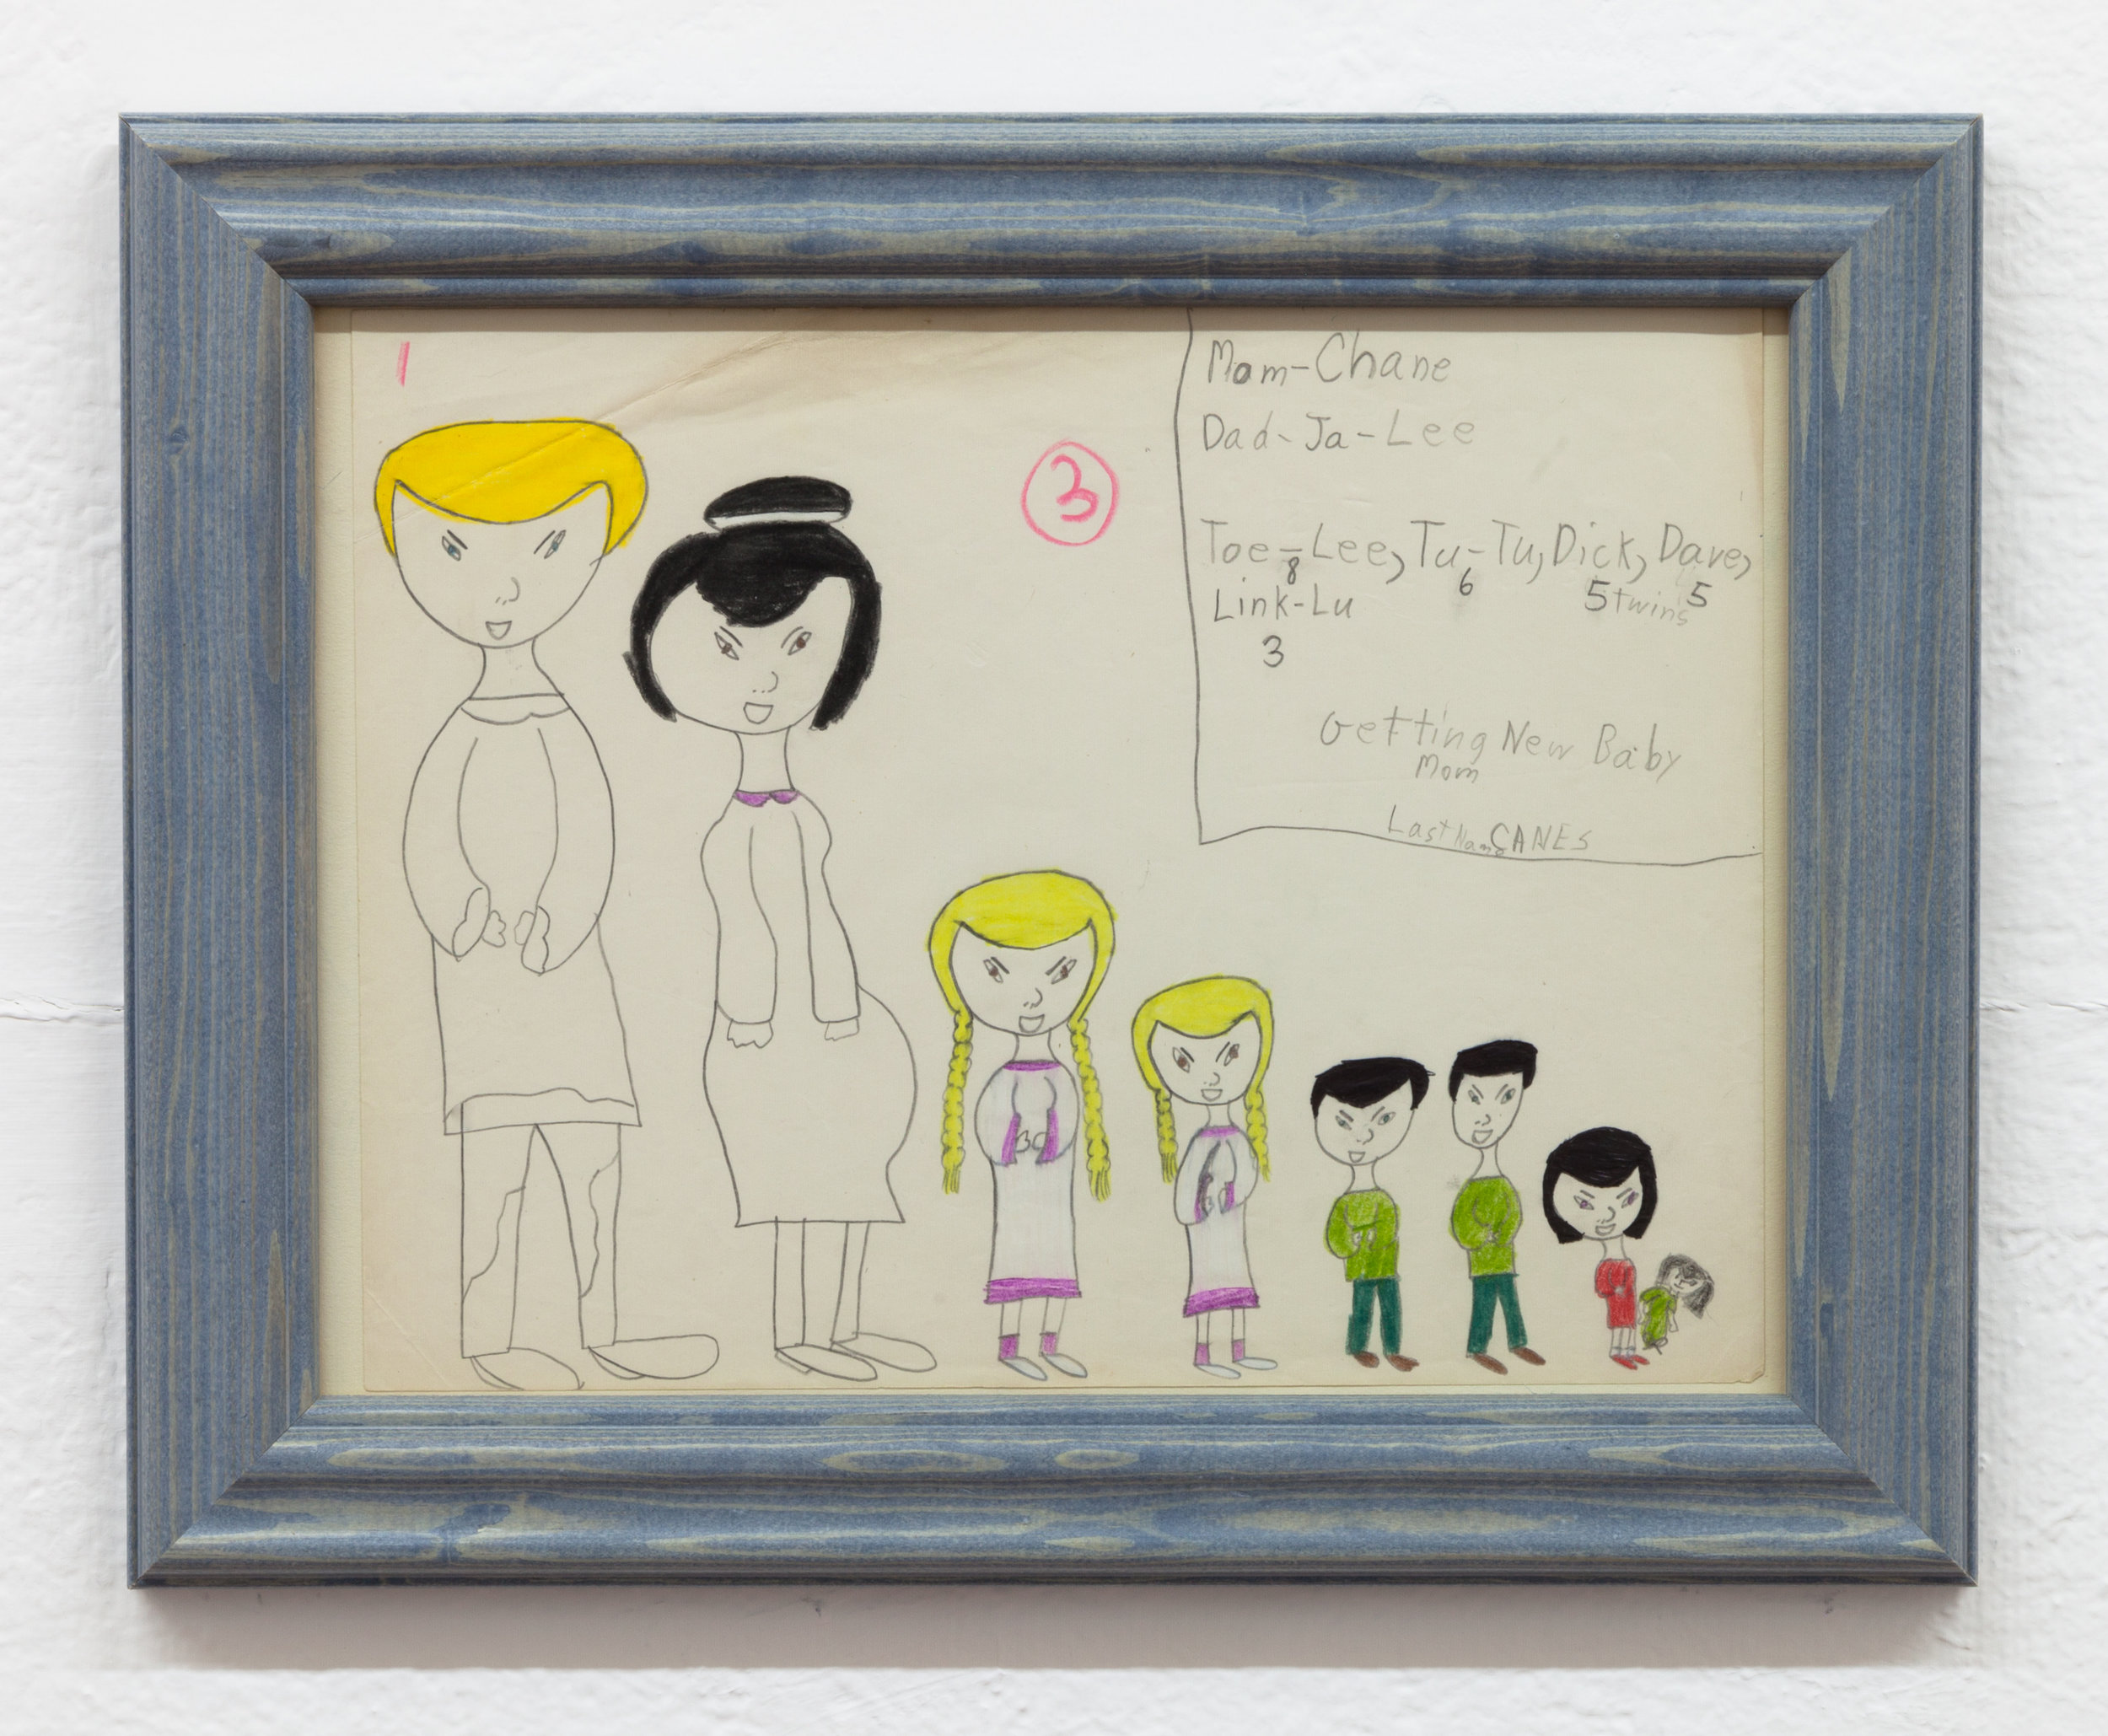  Aunt Nancy, Cane Family, Circa 1963-1968 Pencil and crayon on paper 8.5 x 11 inches + frame 